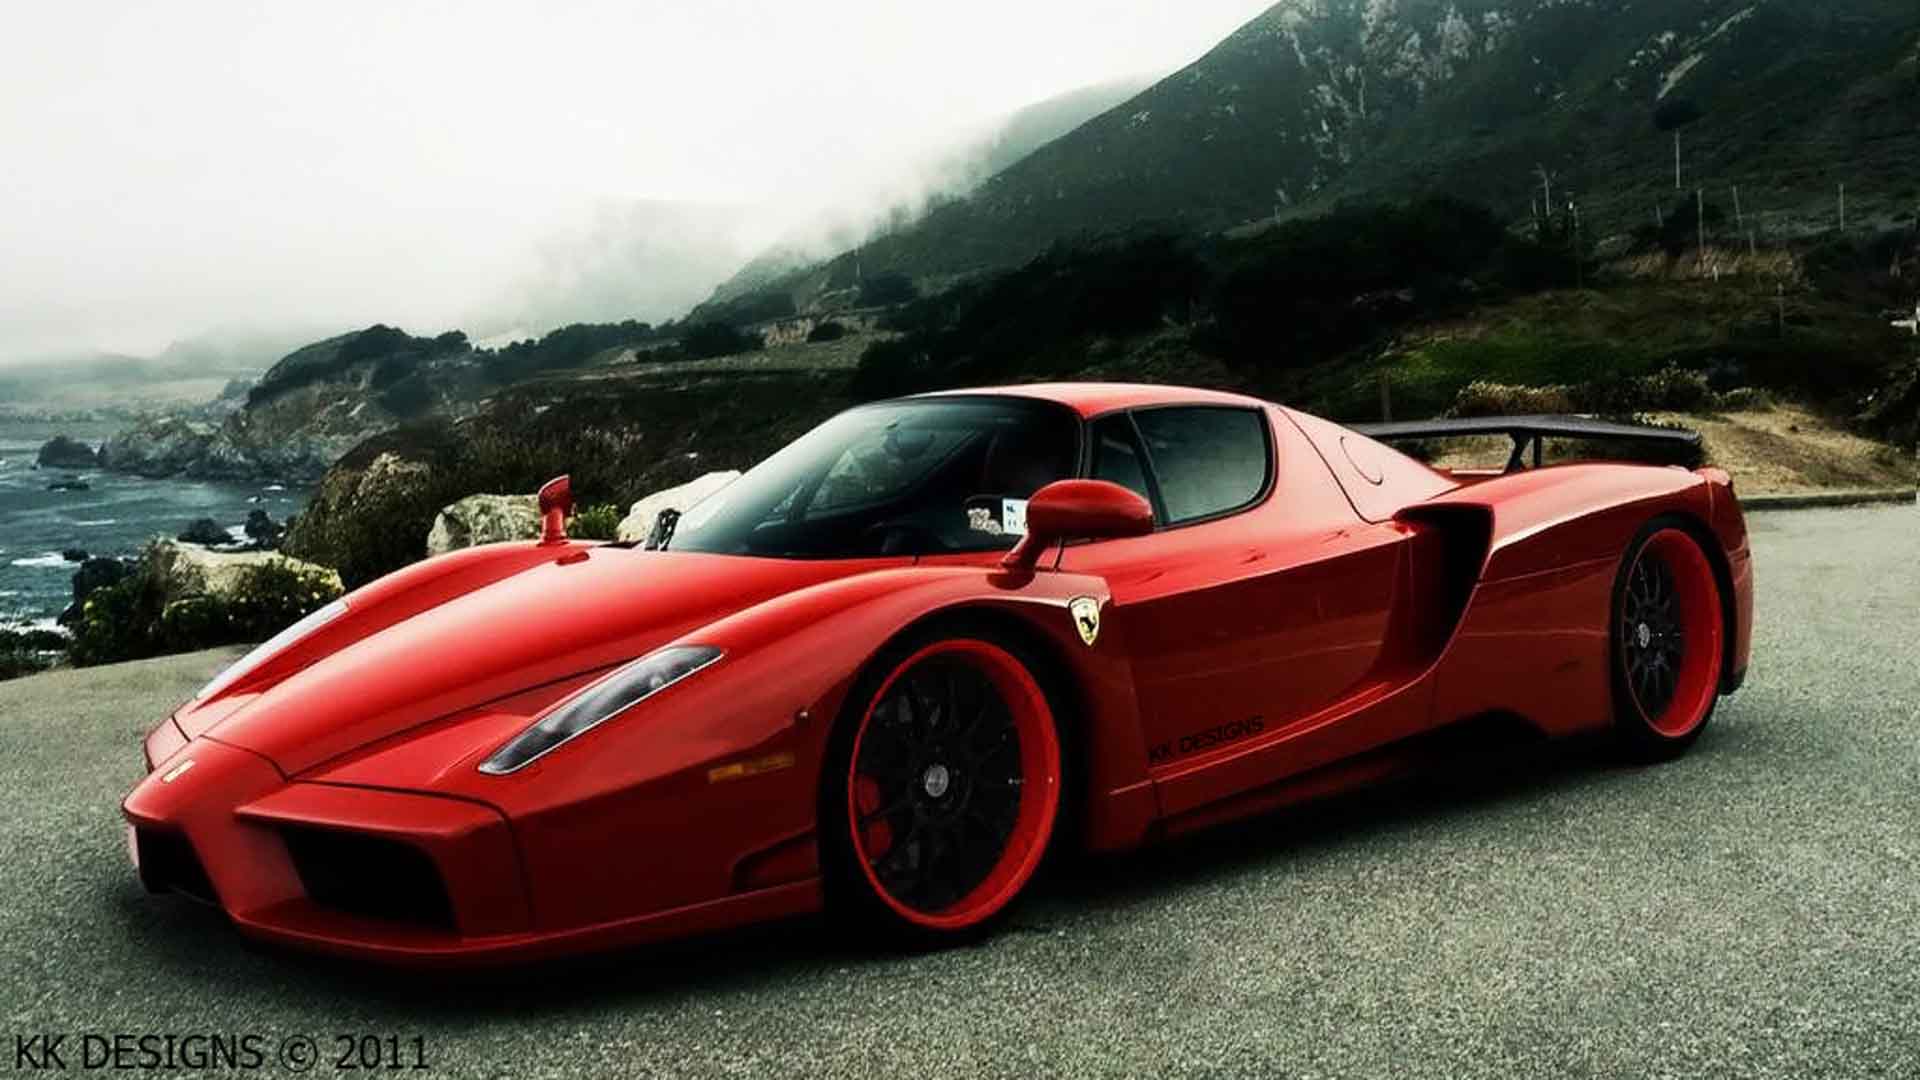 Xpx Cool Exotic Cars Wallpaper HD Background 1920x1200PX